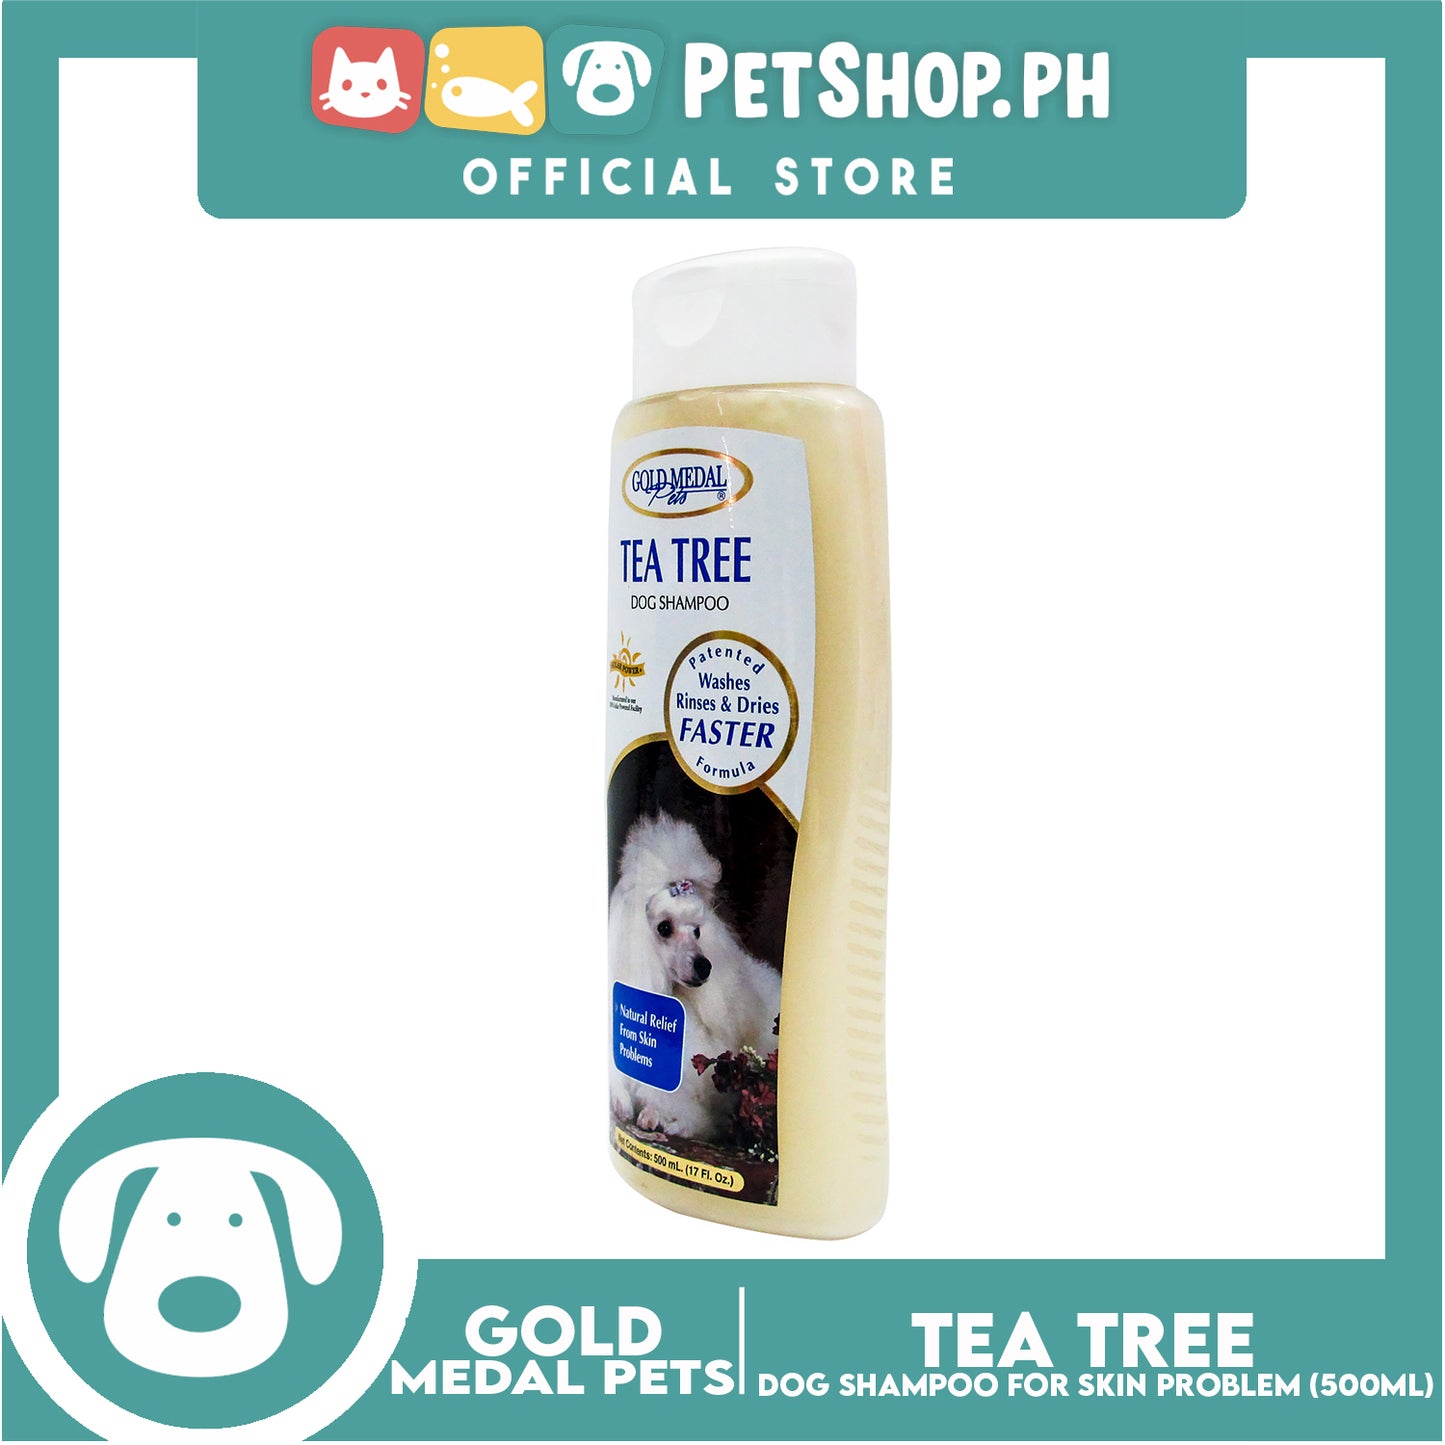 Gold Medal Pets Tea Tree Dog Shampoo 17oz Natural Relief from Skin Problems